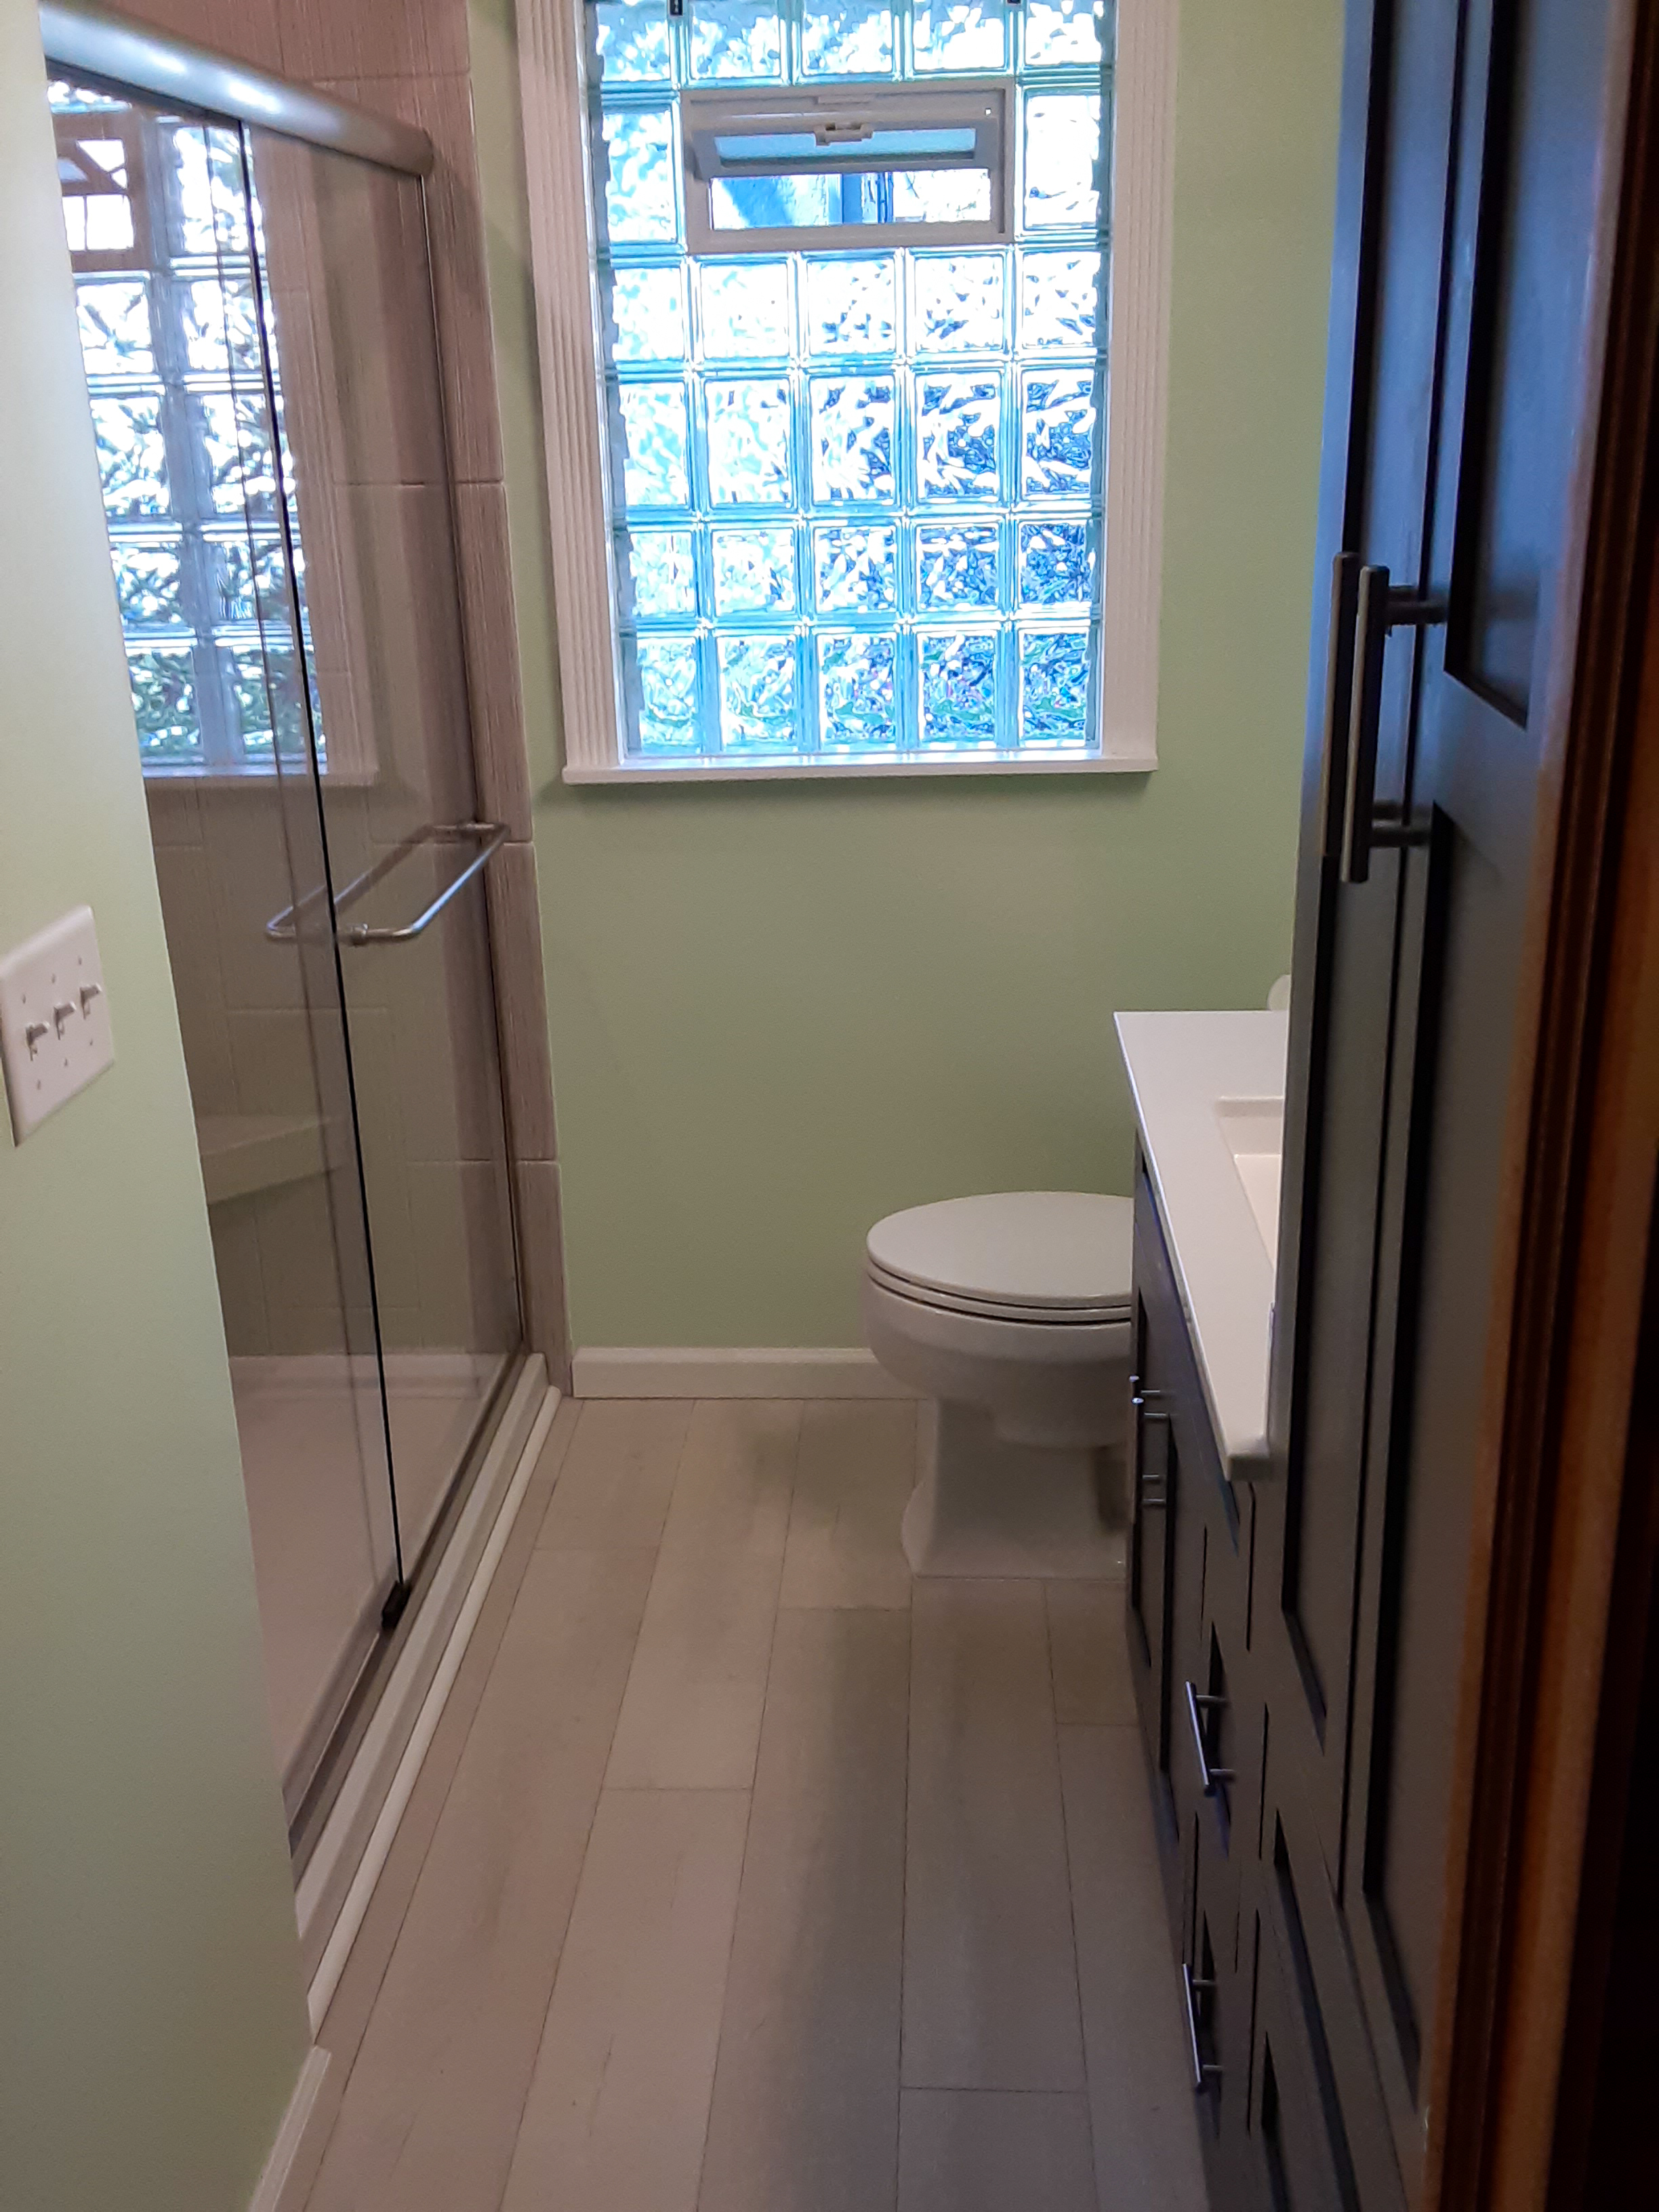 Tile Bathroom to Groutless Bathroom Materials